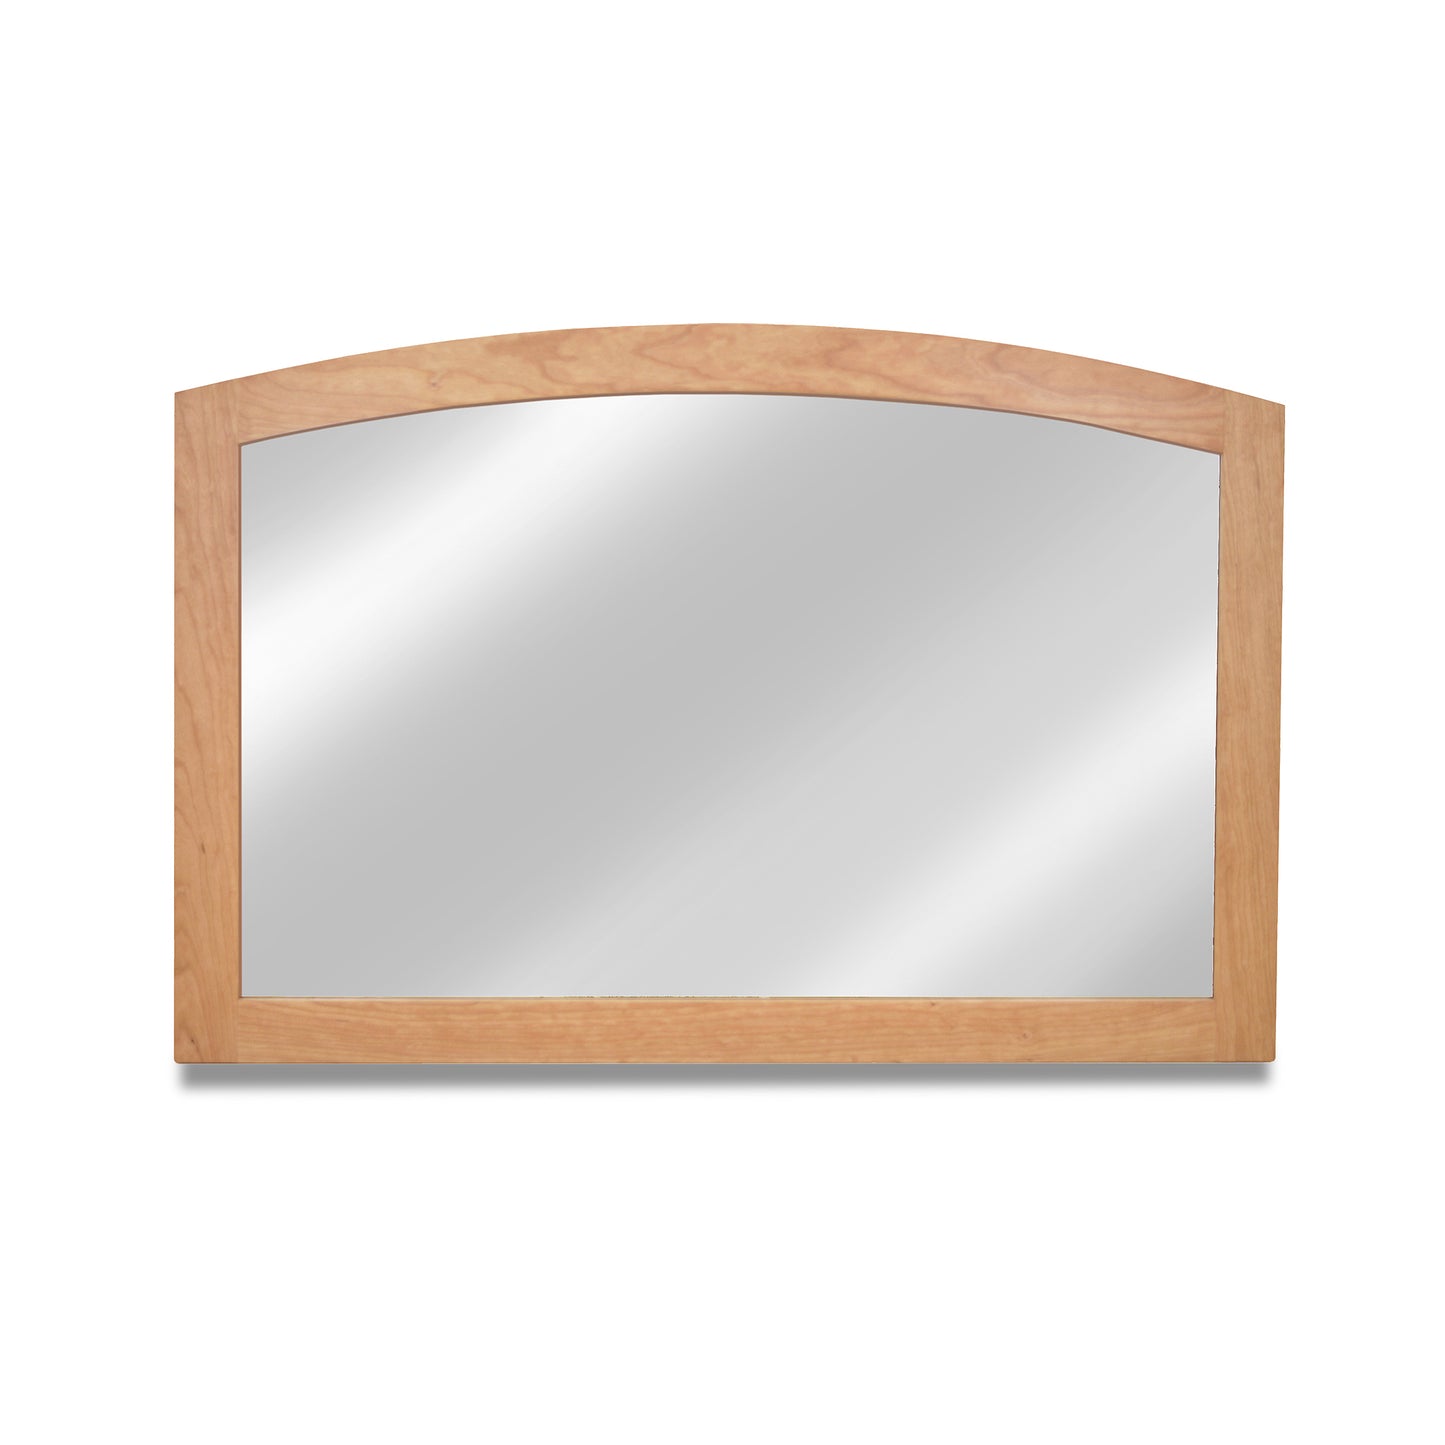 An American Shaker Arched Mirror by Maple Corner Woodworks with a hardwood frame on a white background.